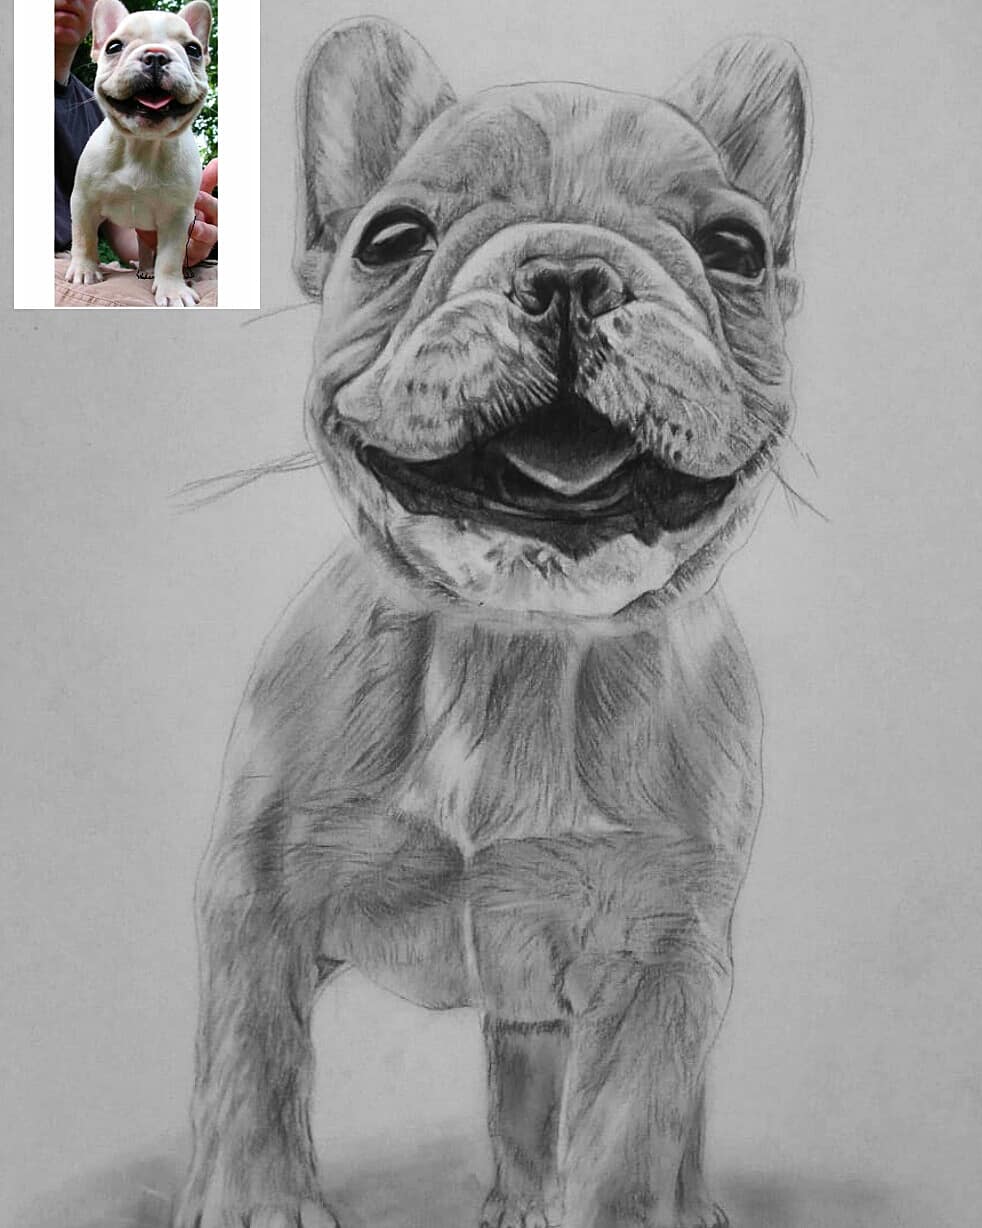 Buy this exciting Pet Pencil Drawing From Photo for your loved one ...